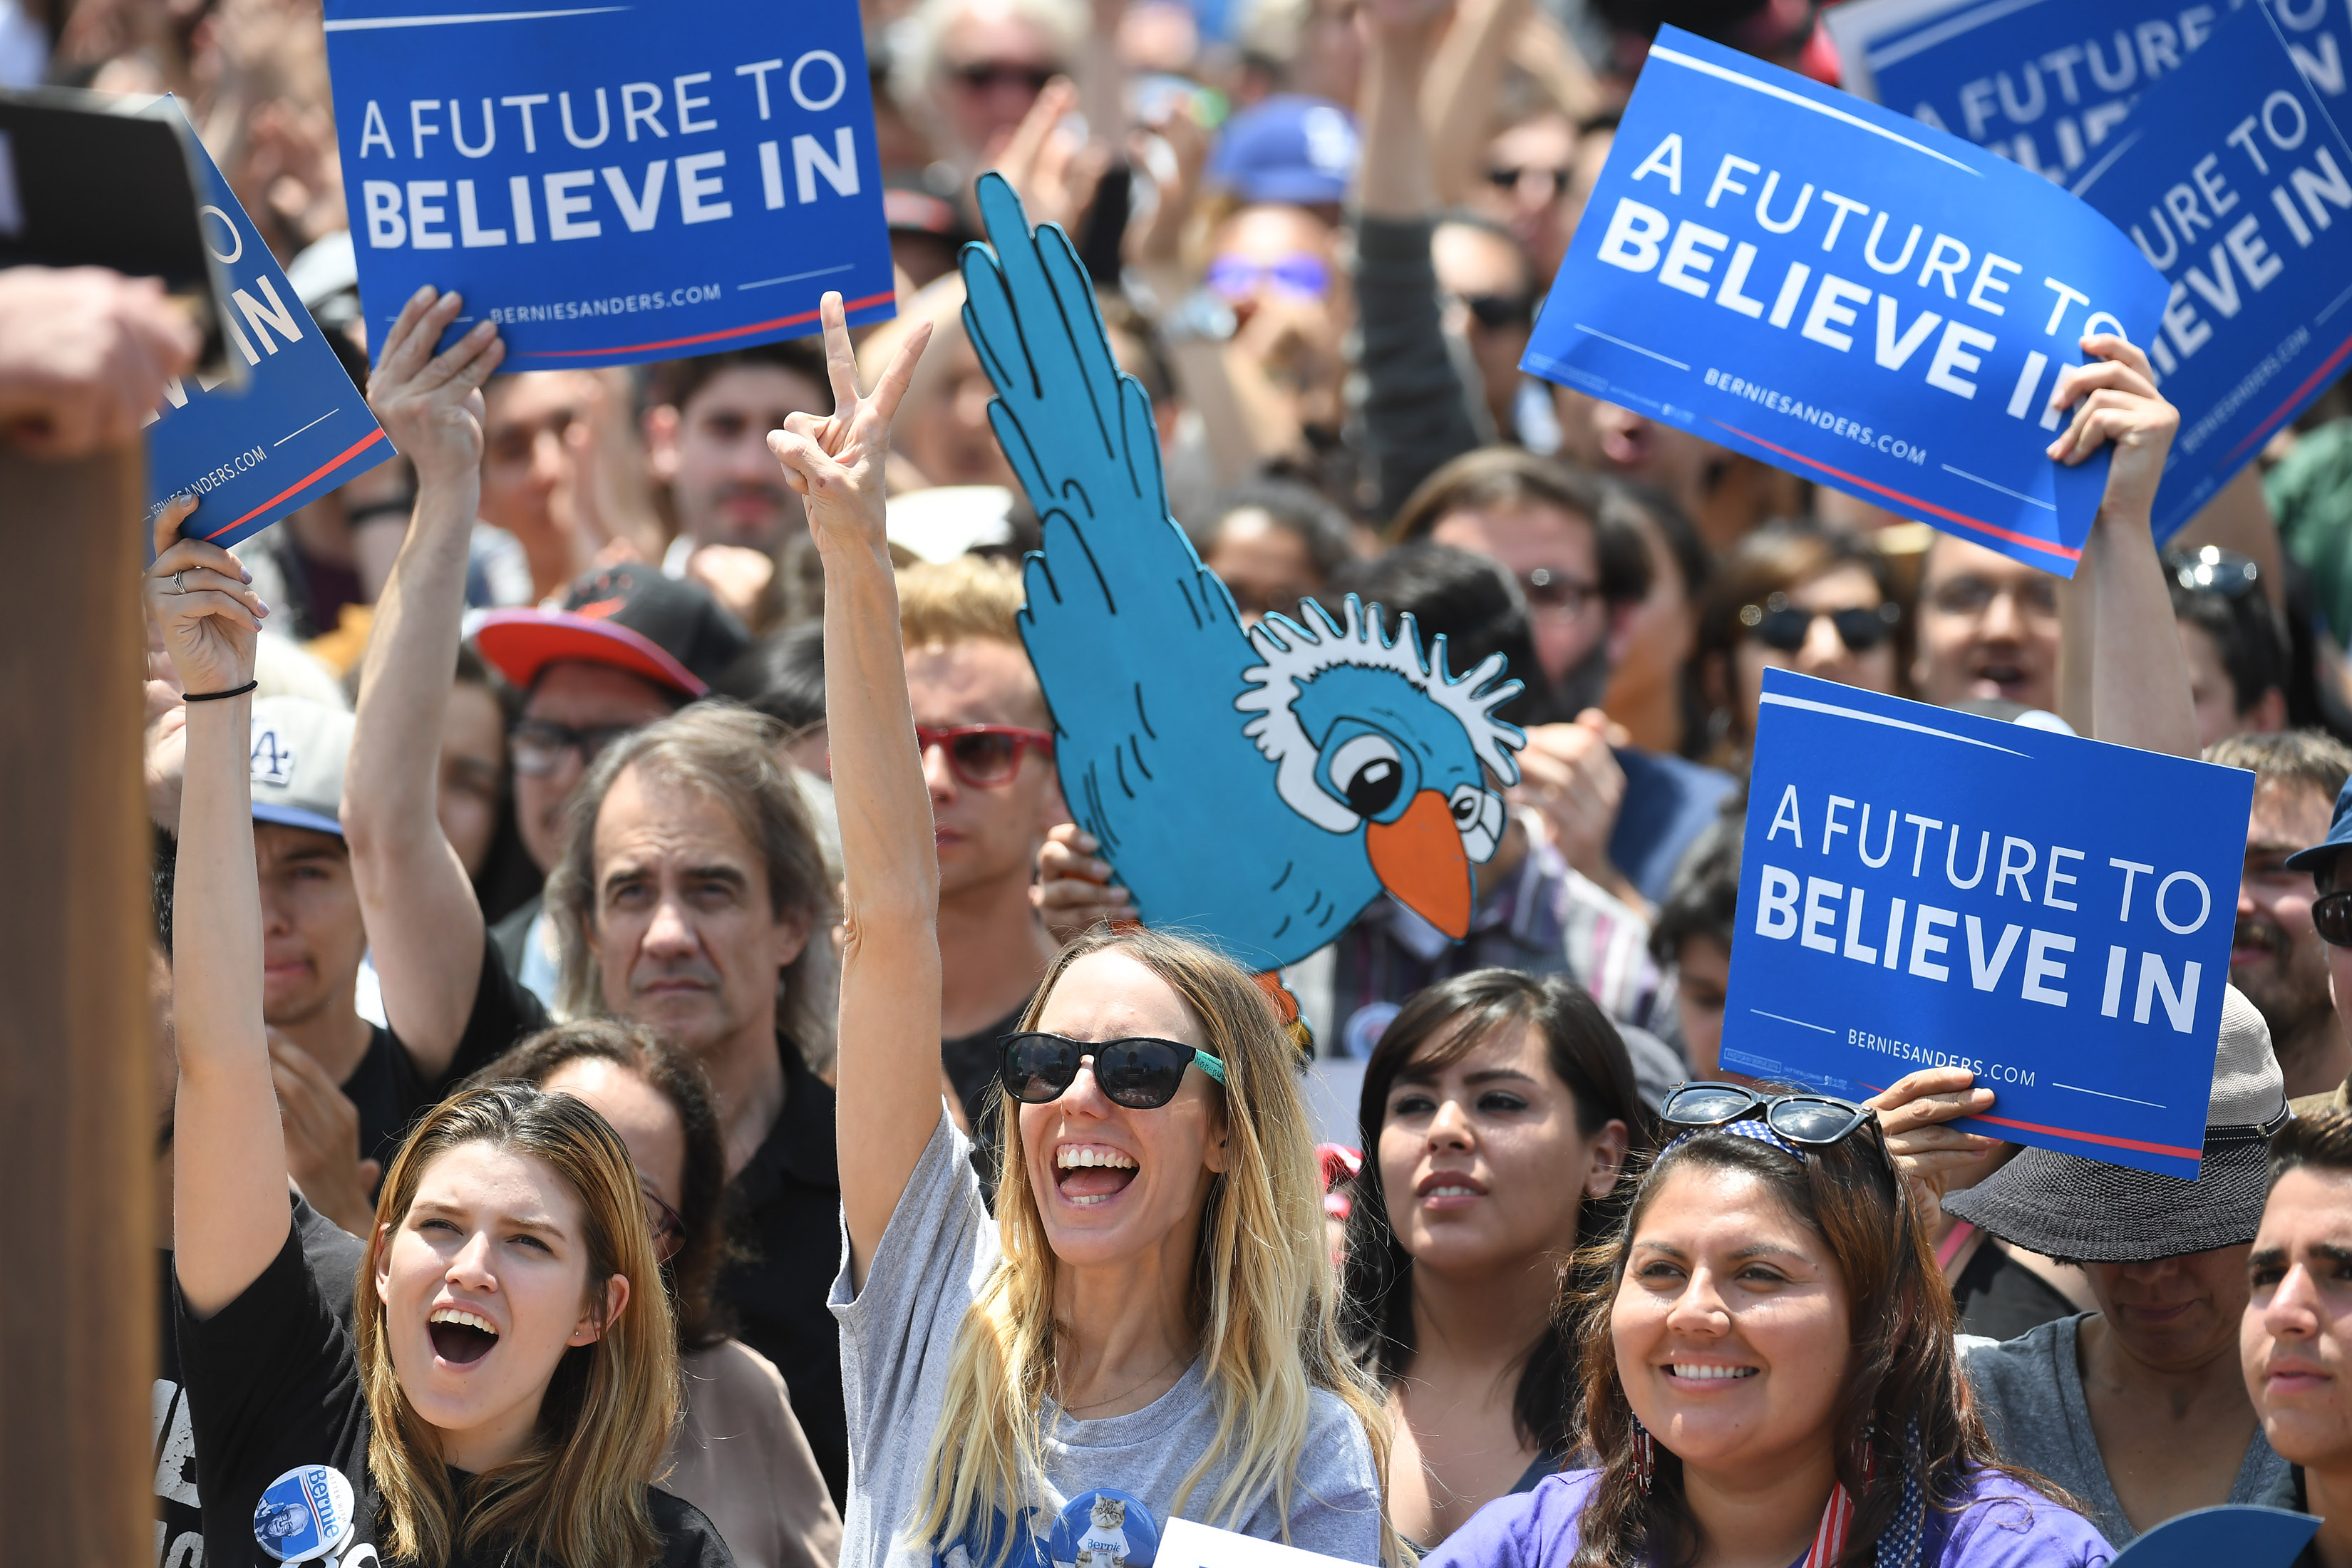 People listen as Bernie Sanders speaks during a rally at Lincoln Park on May 23, 2016 in Los Angeles. (Matt McClain—The Washington Post/Getty Images)